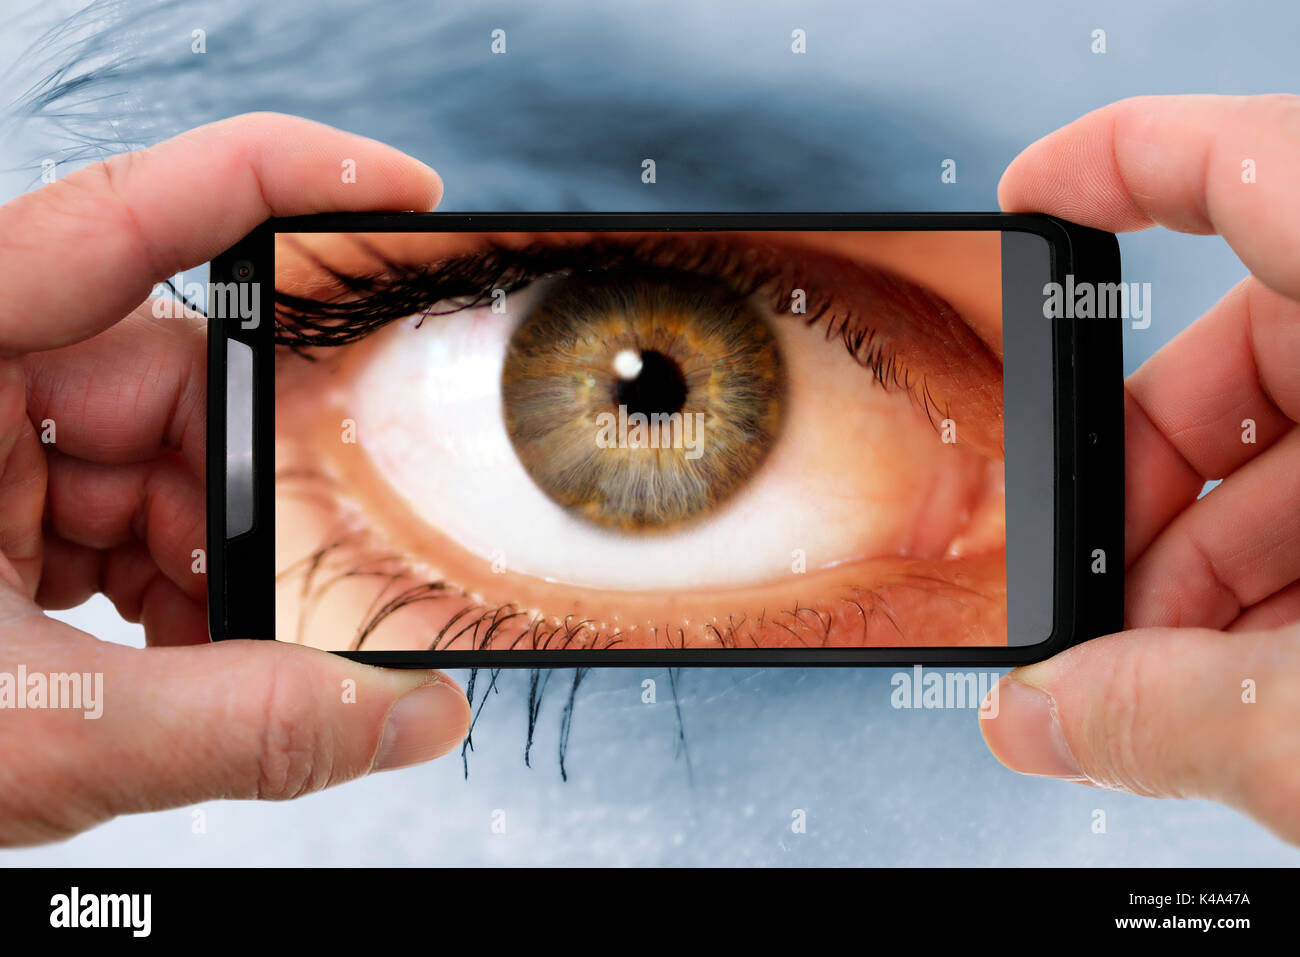 Womans Eye In A Cellphone, Gawker Stock Photo